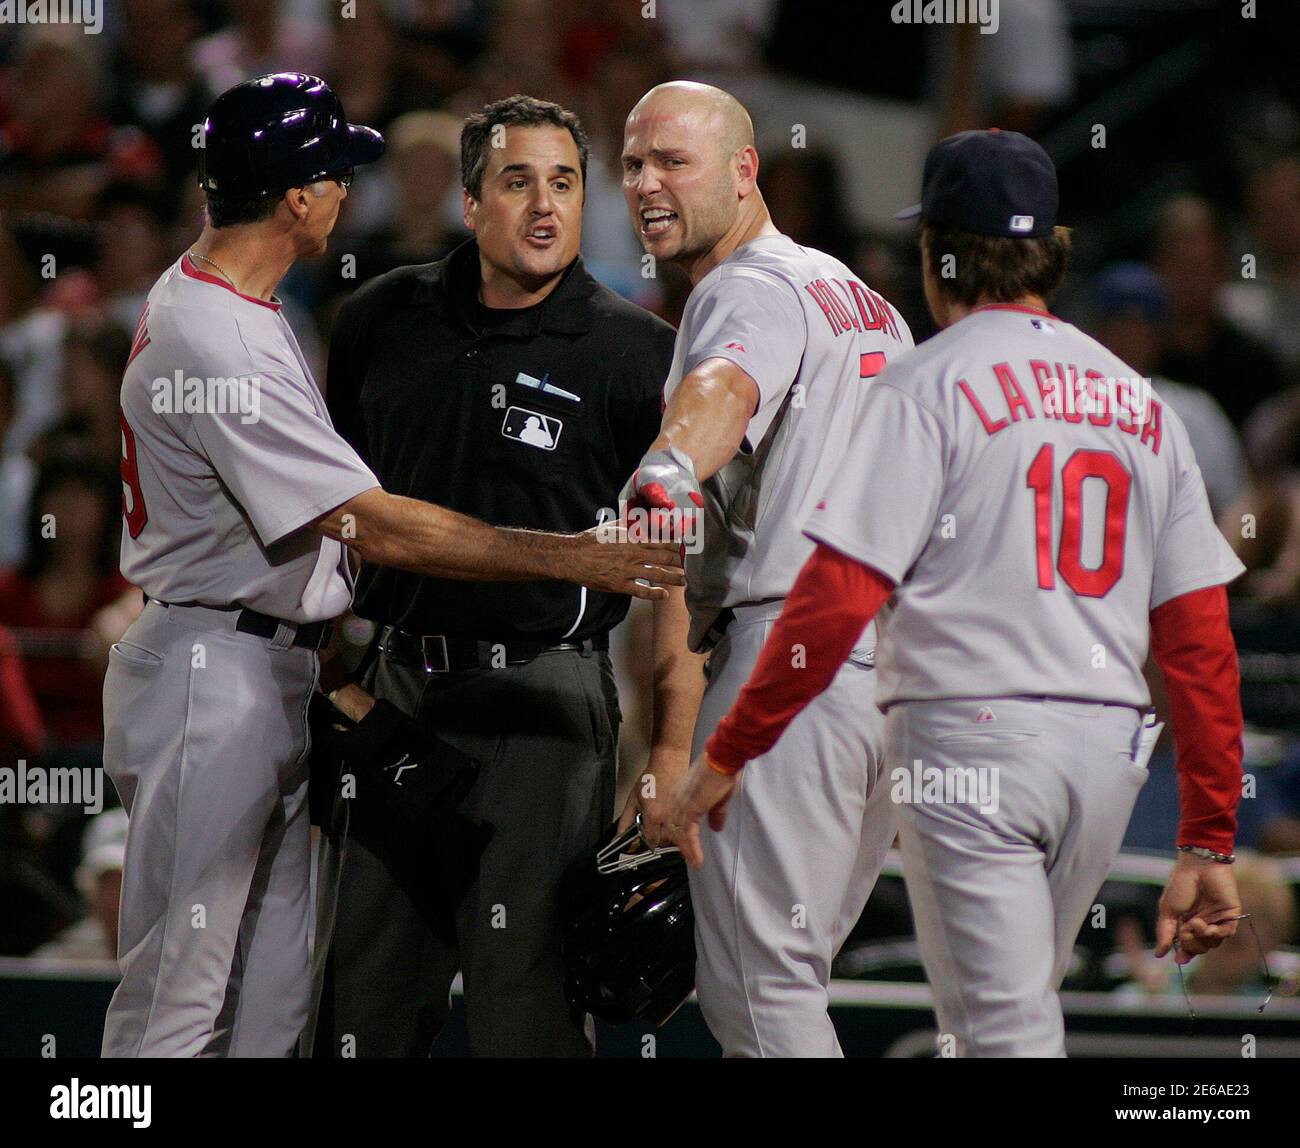 St. Louis Cardinals batter Matt Holliday (2nd R) argues with homeplate umpire Mike DiMuro (2nd L) along with Cards coach Dave McKay (L) after being ejected from the game for arguing his strikeout in the fourth inning of National League MLB baseball action in Atlanta, Georgia, September 9, 2010.  Approaching at right is Cardinals manager Tony LaRussa.  REUTERS/Tami Chappell (UNITED STATES - Tags: SPORT BASEBALL) Stock Photo